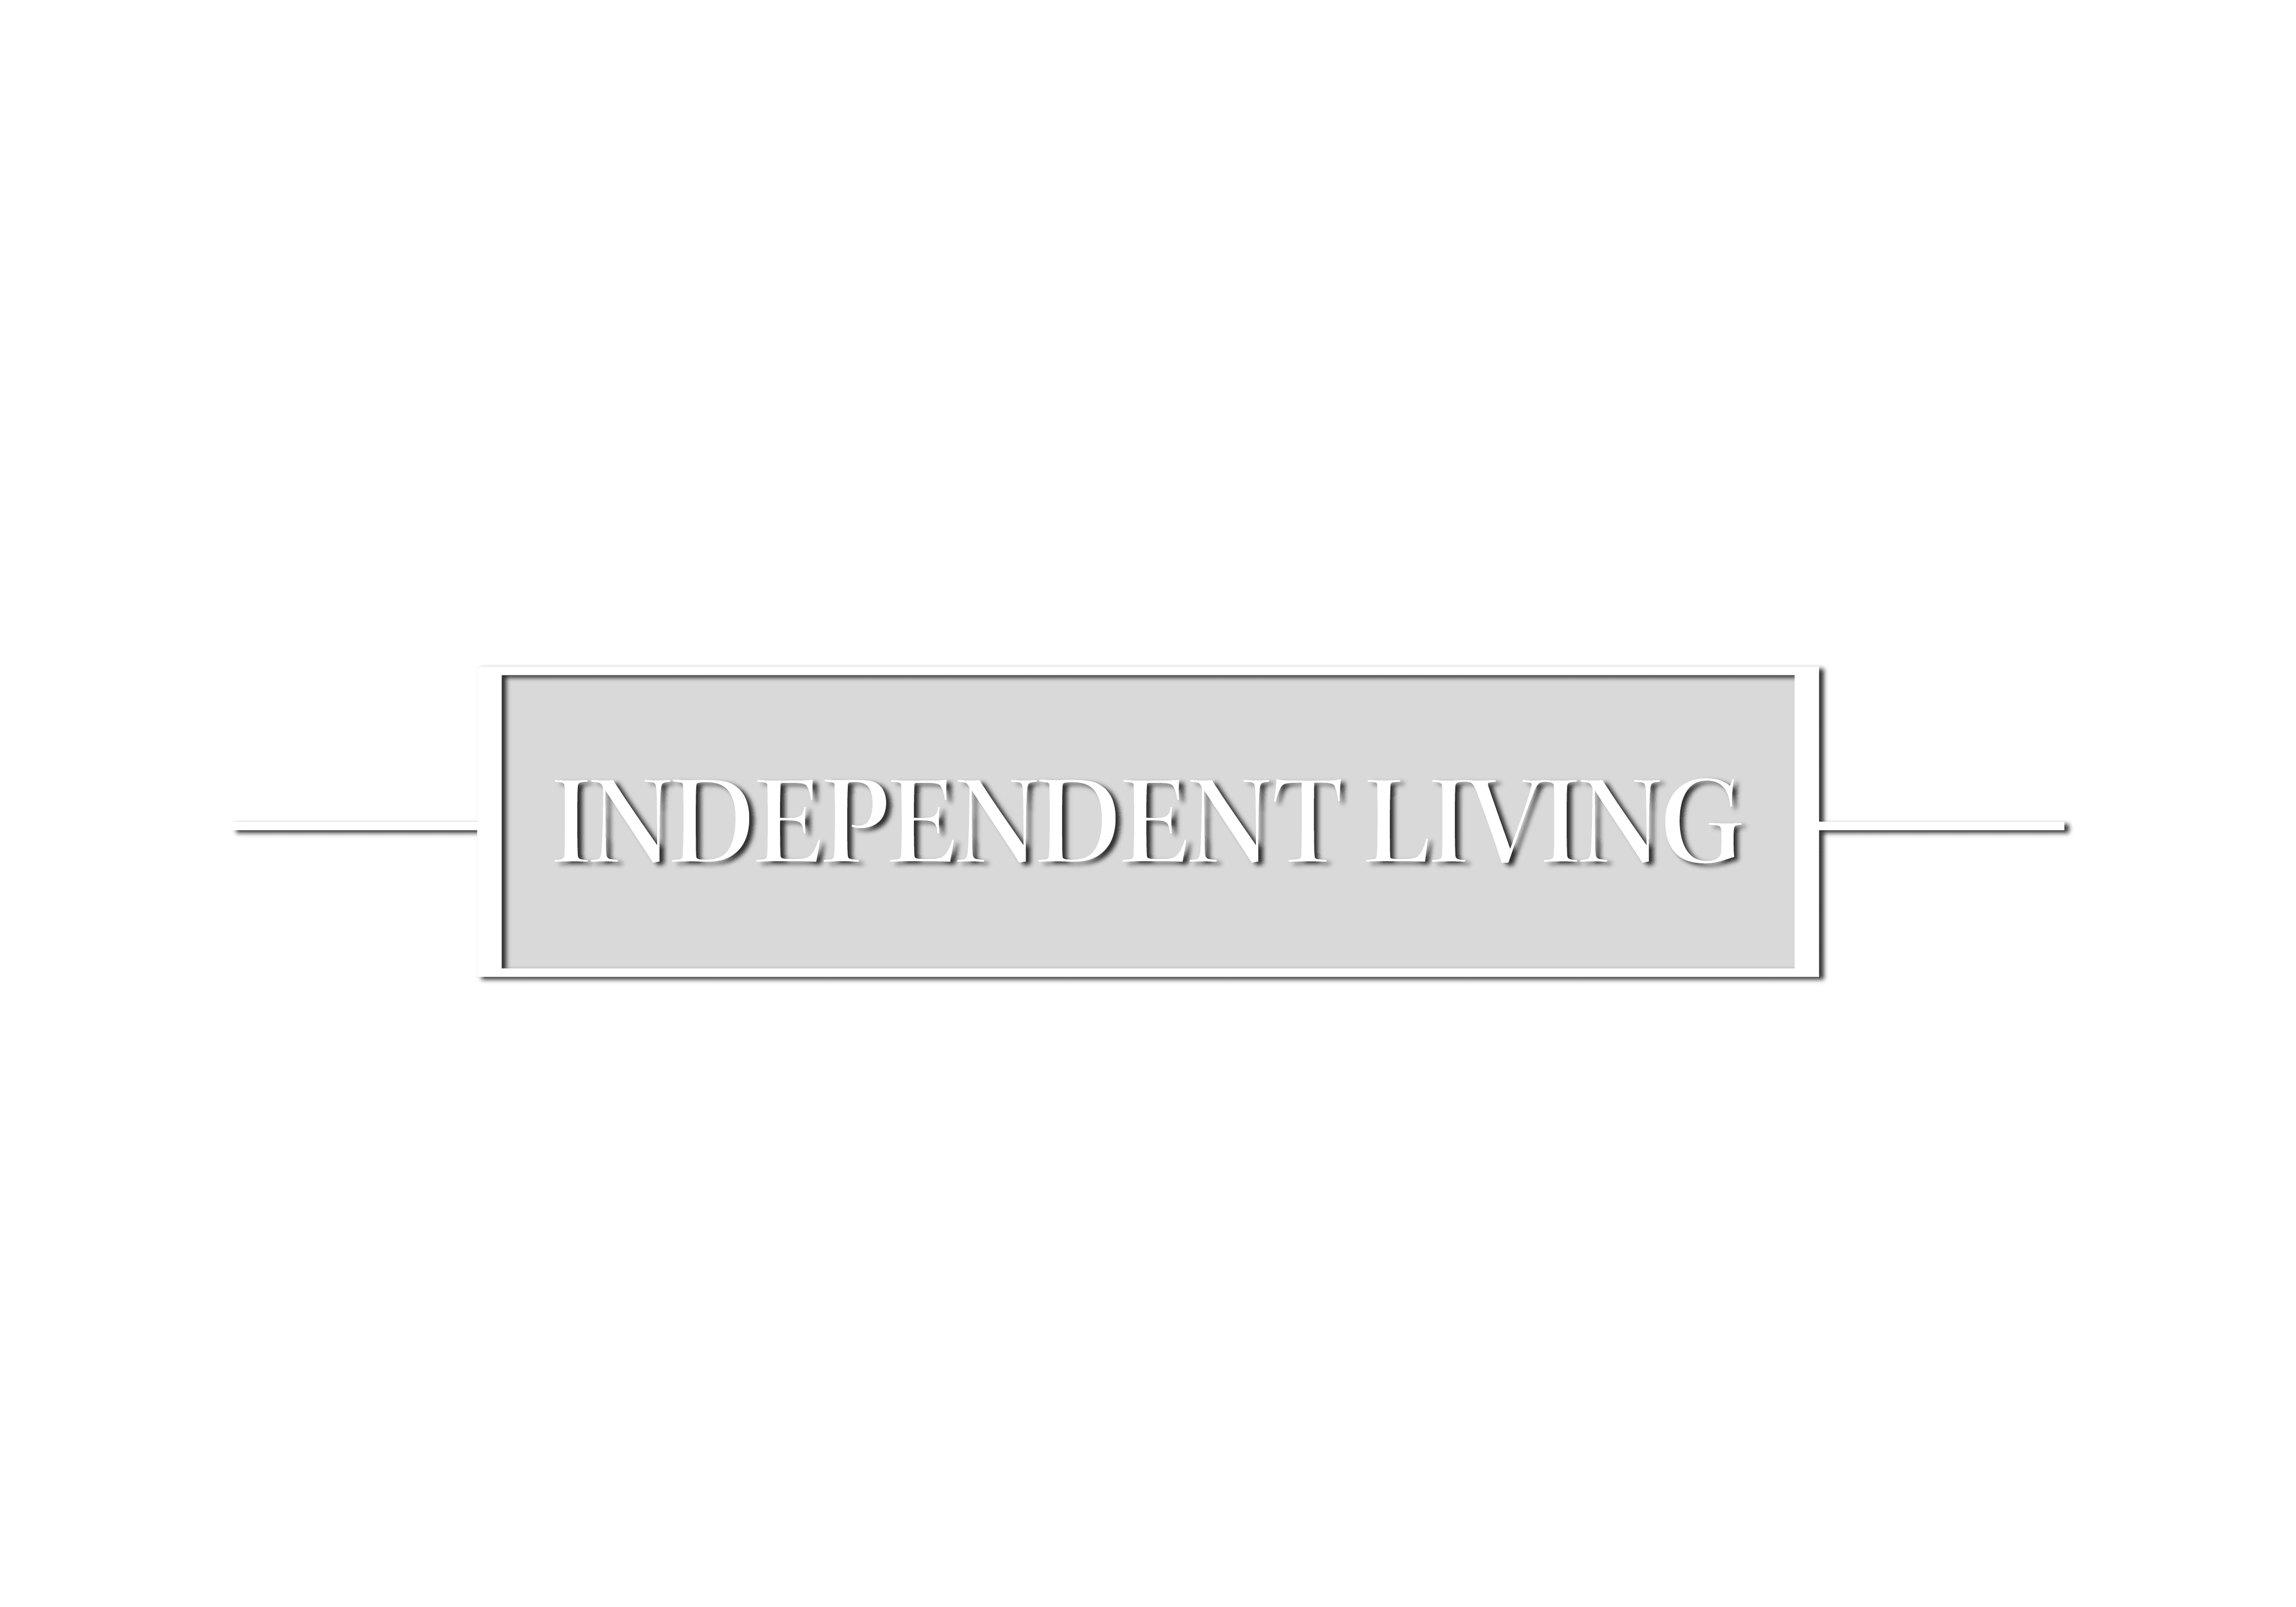 independent living graphic